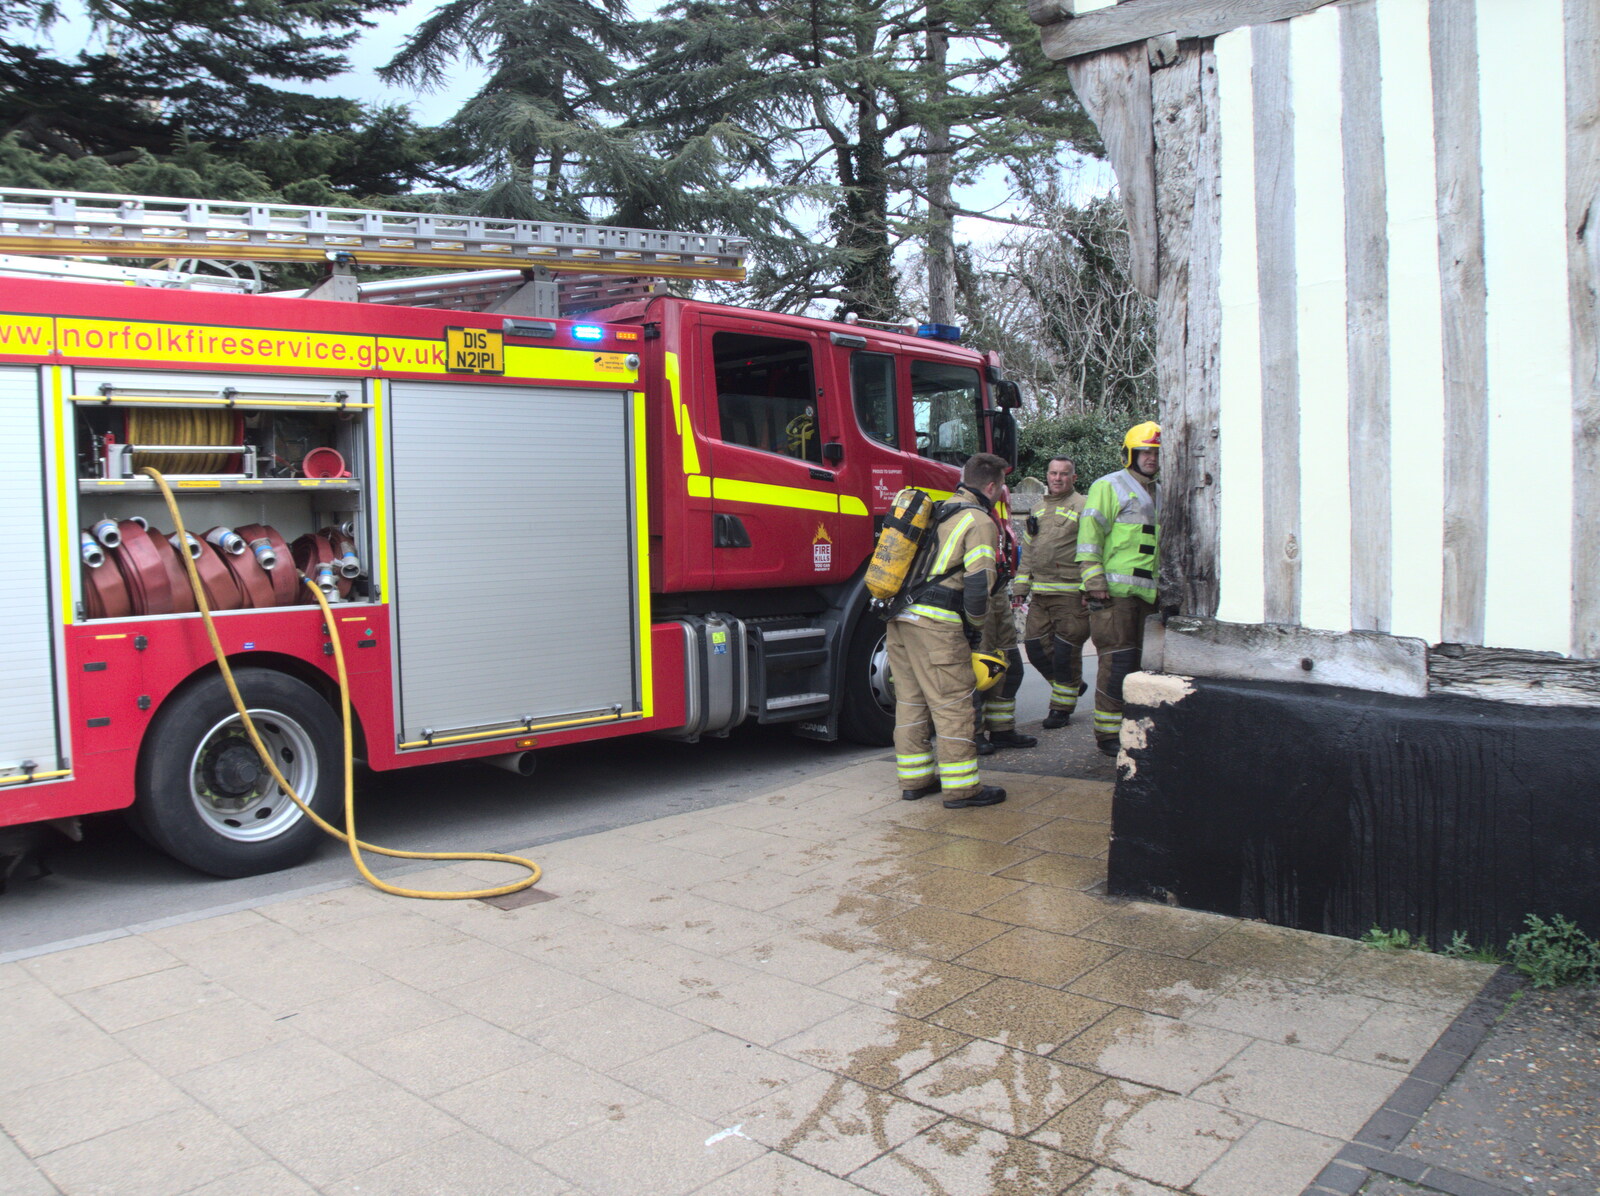 The corner of Dolphin House had been on fire from Dolphin House Fire and an Escape Room, Diss and Norwich - 26th March 2023